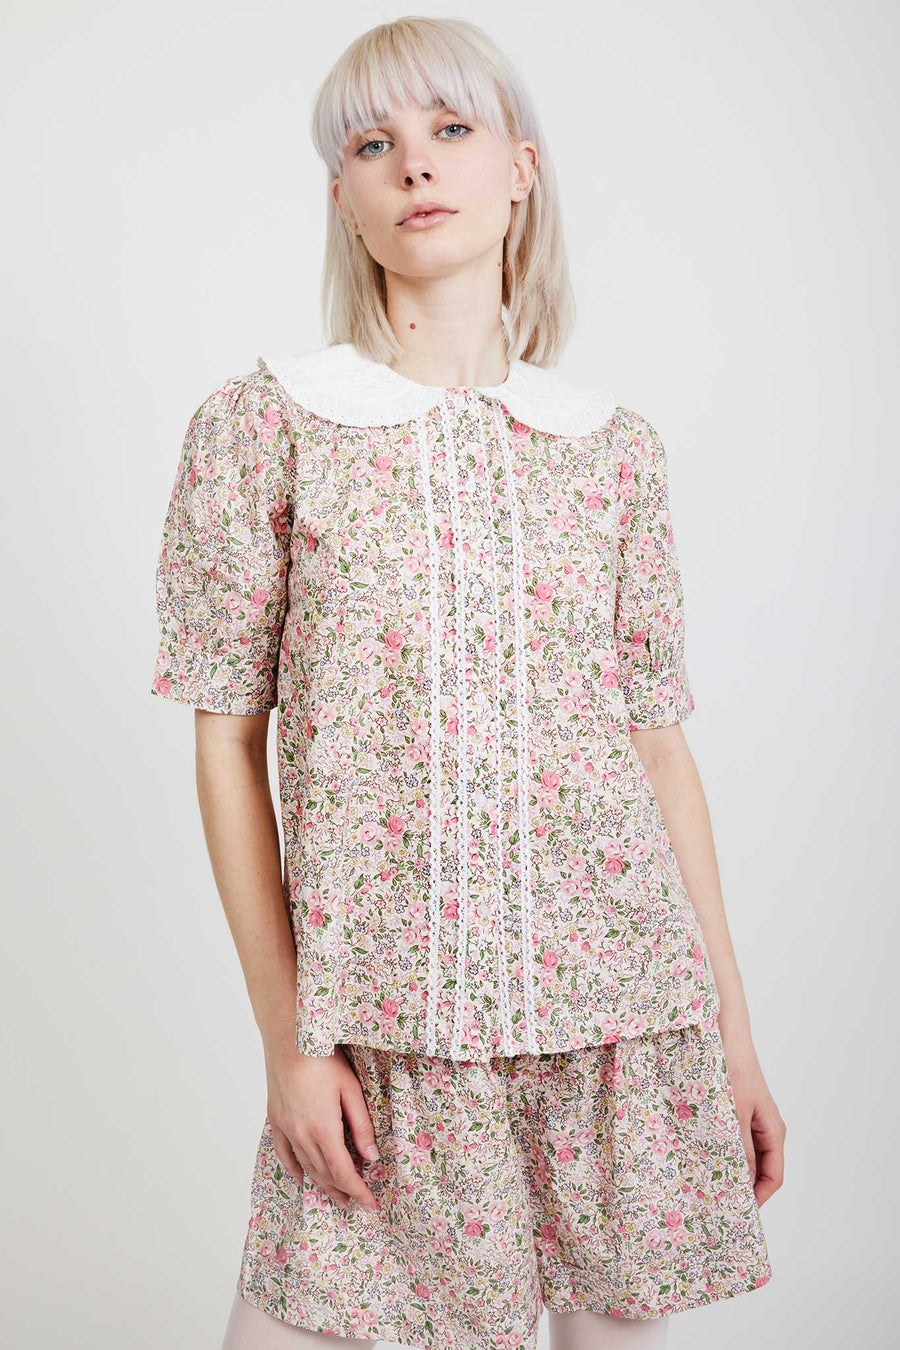 Buy Love & Roses Embellished Collar Lace Trim Shirt from the Laura Ashley  online shop